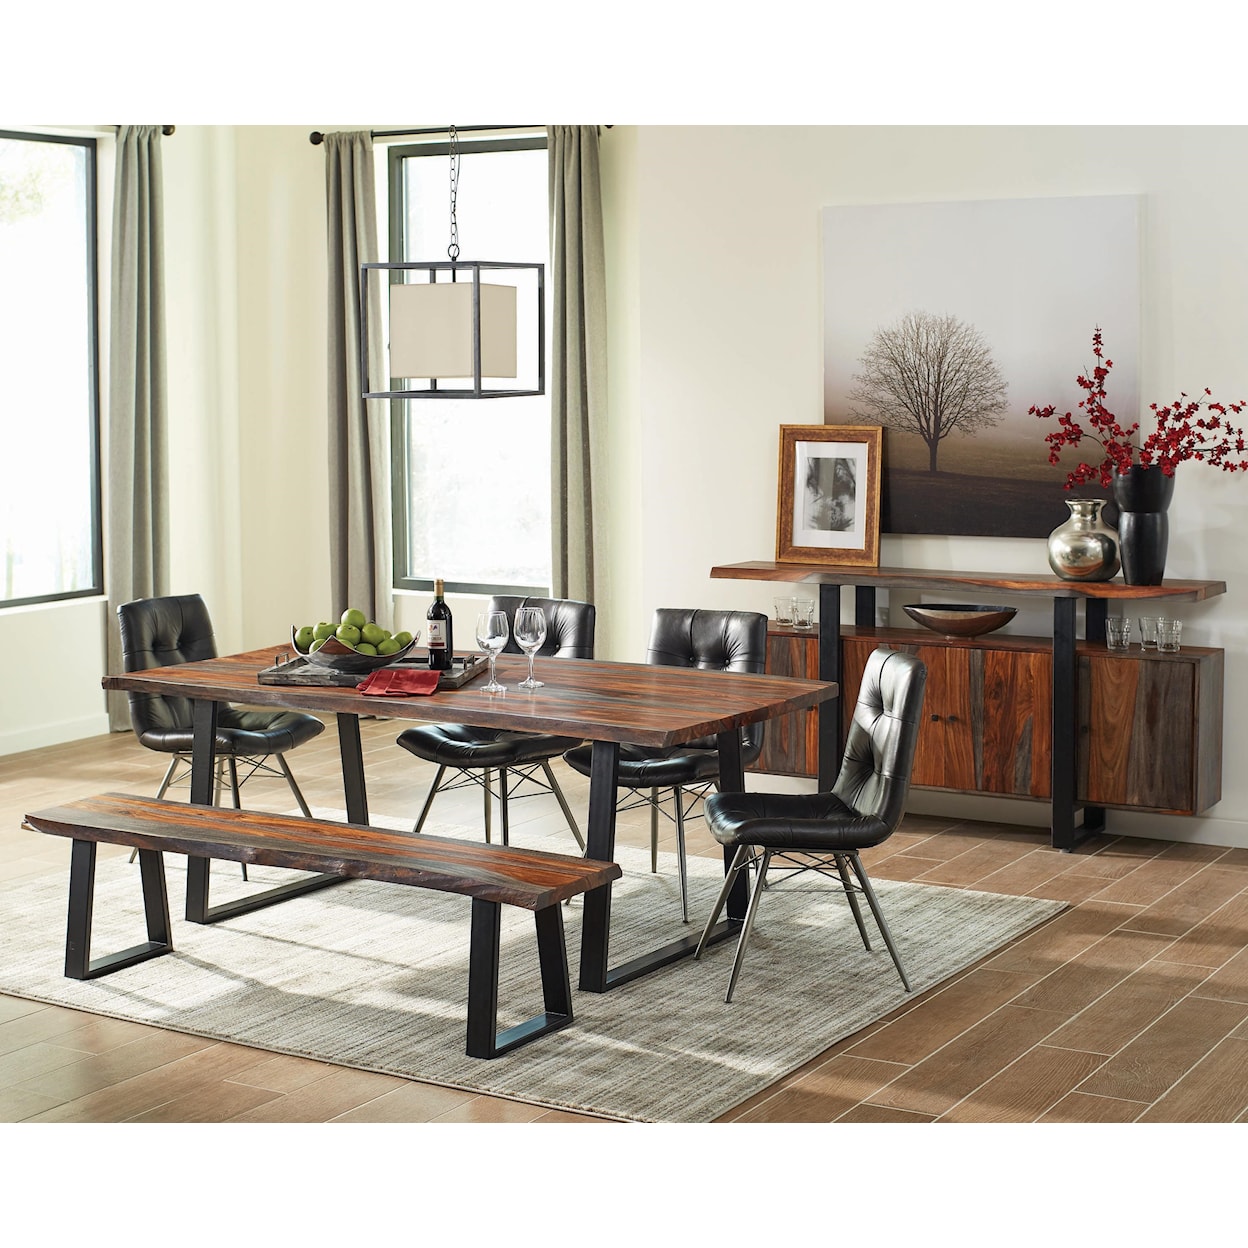 Coaster Everyday Ditman Rustic Dining Table